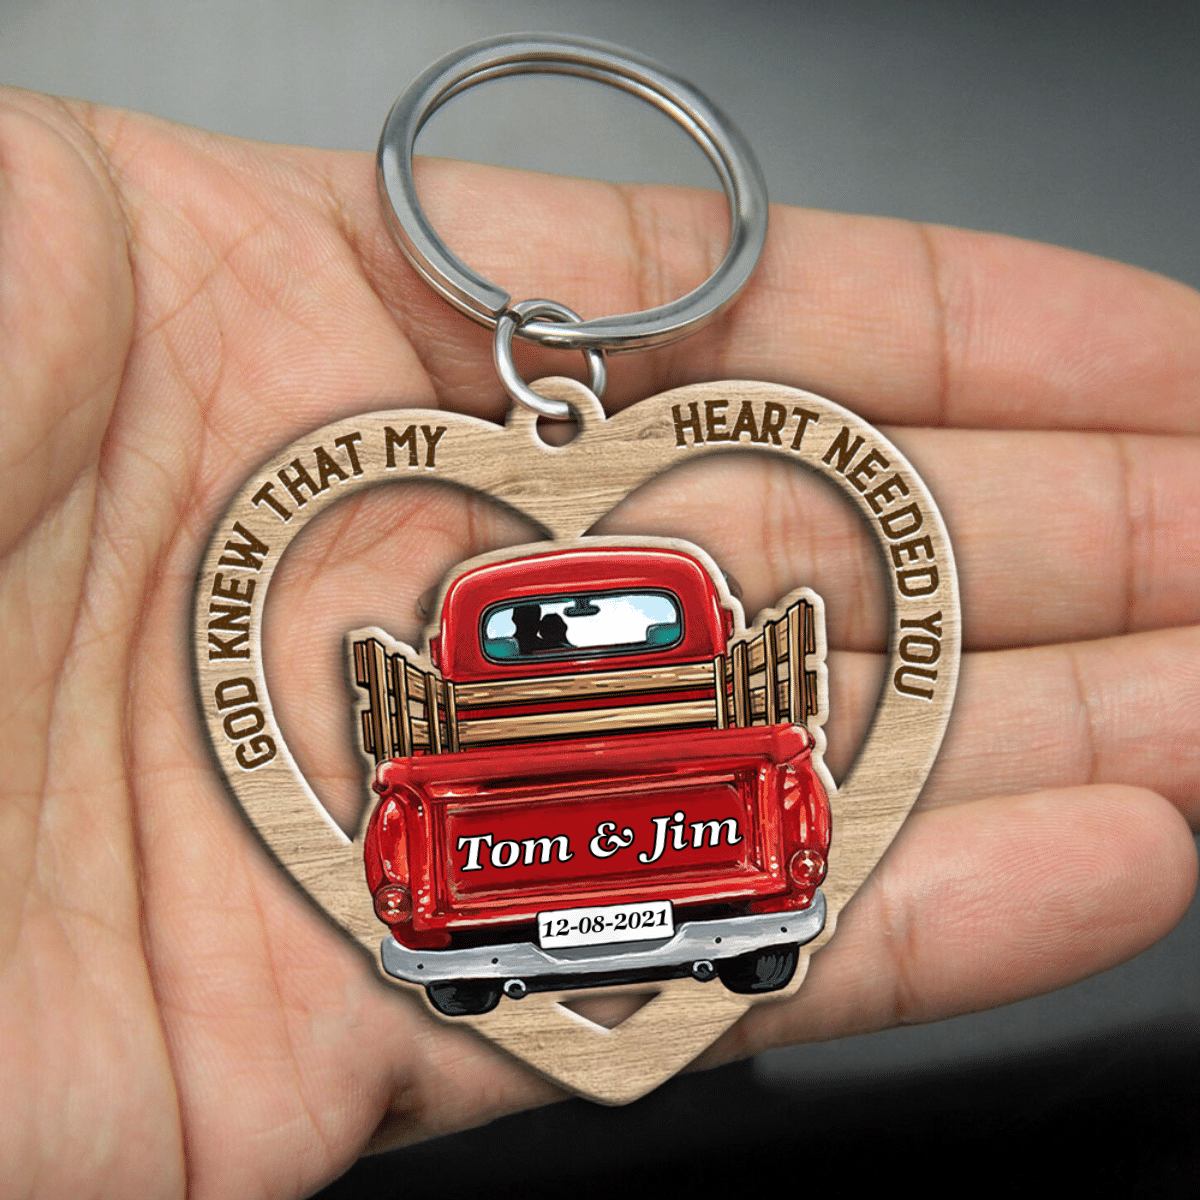 Personalized Couple Keychain/ Red Truck God knew that my heart needed you keychain for girlfriend/ wife